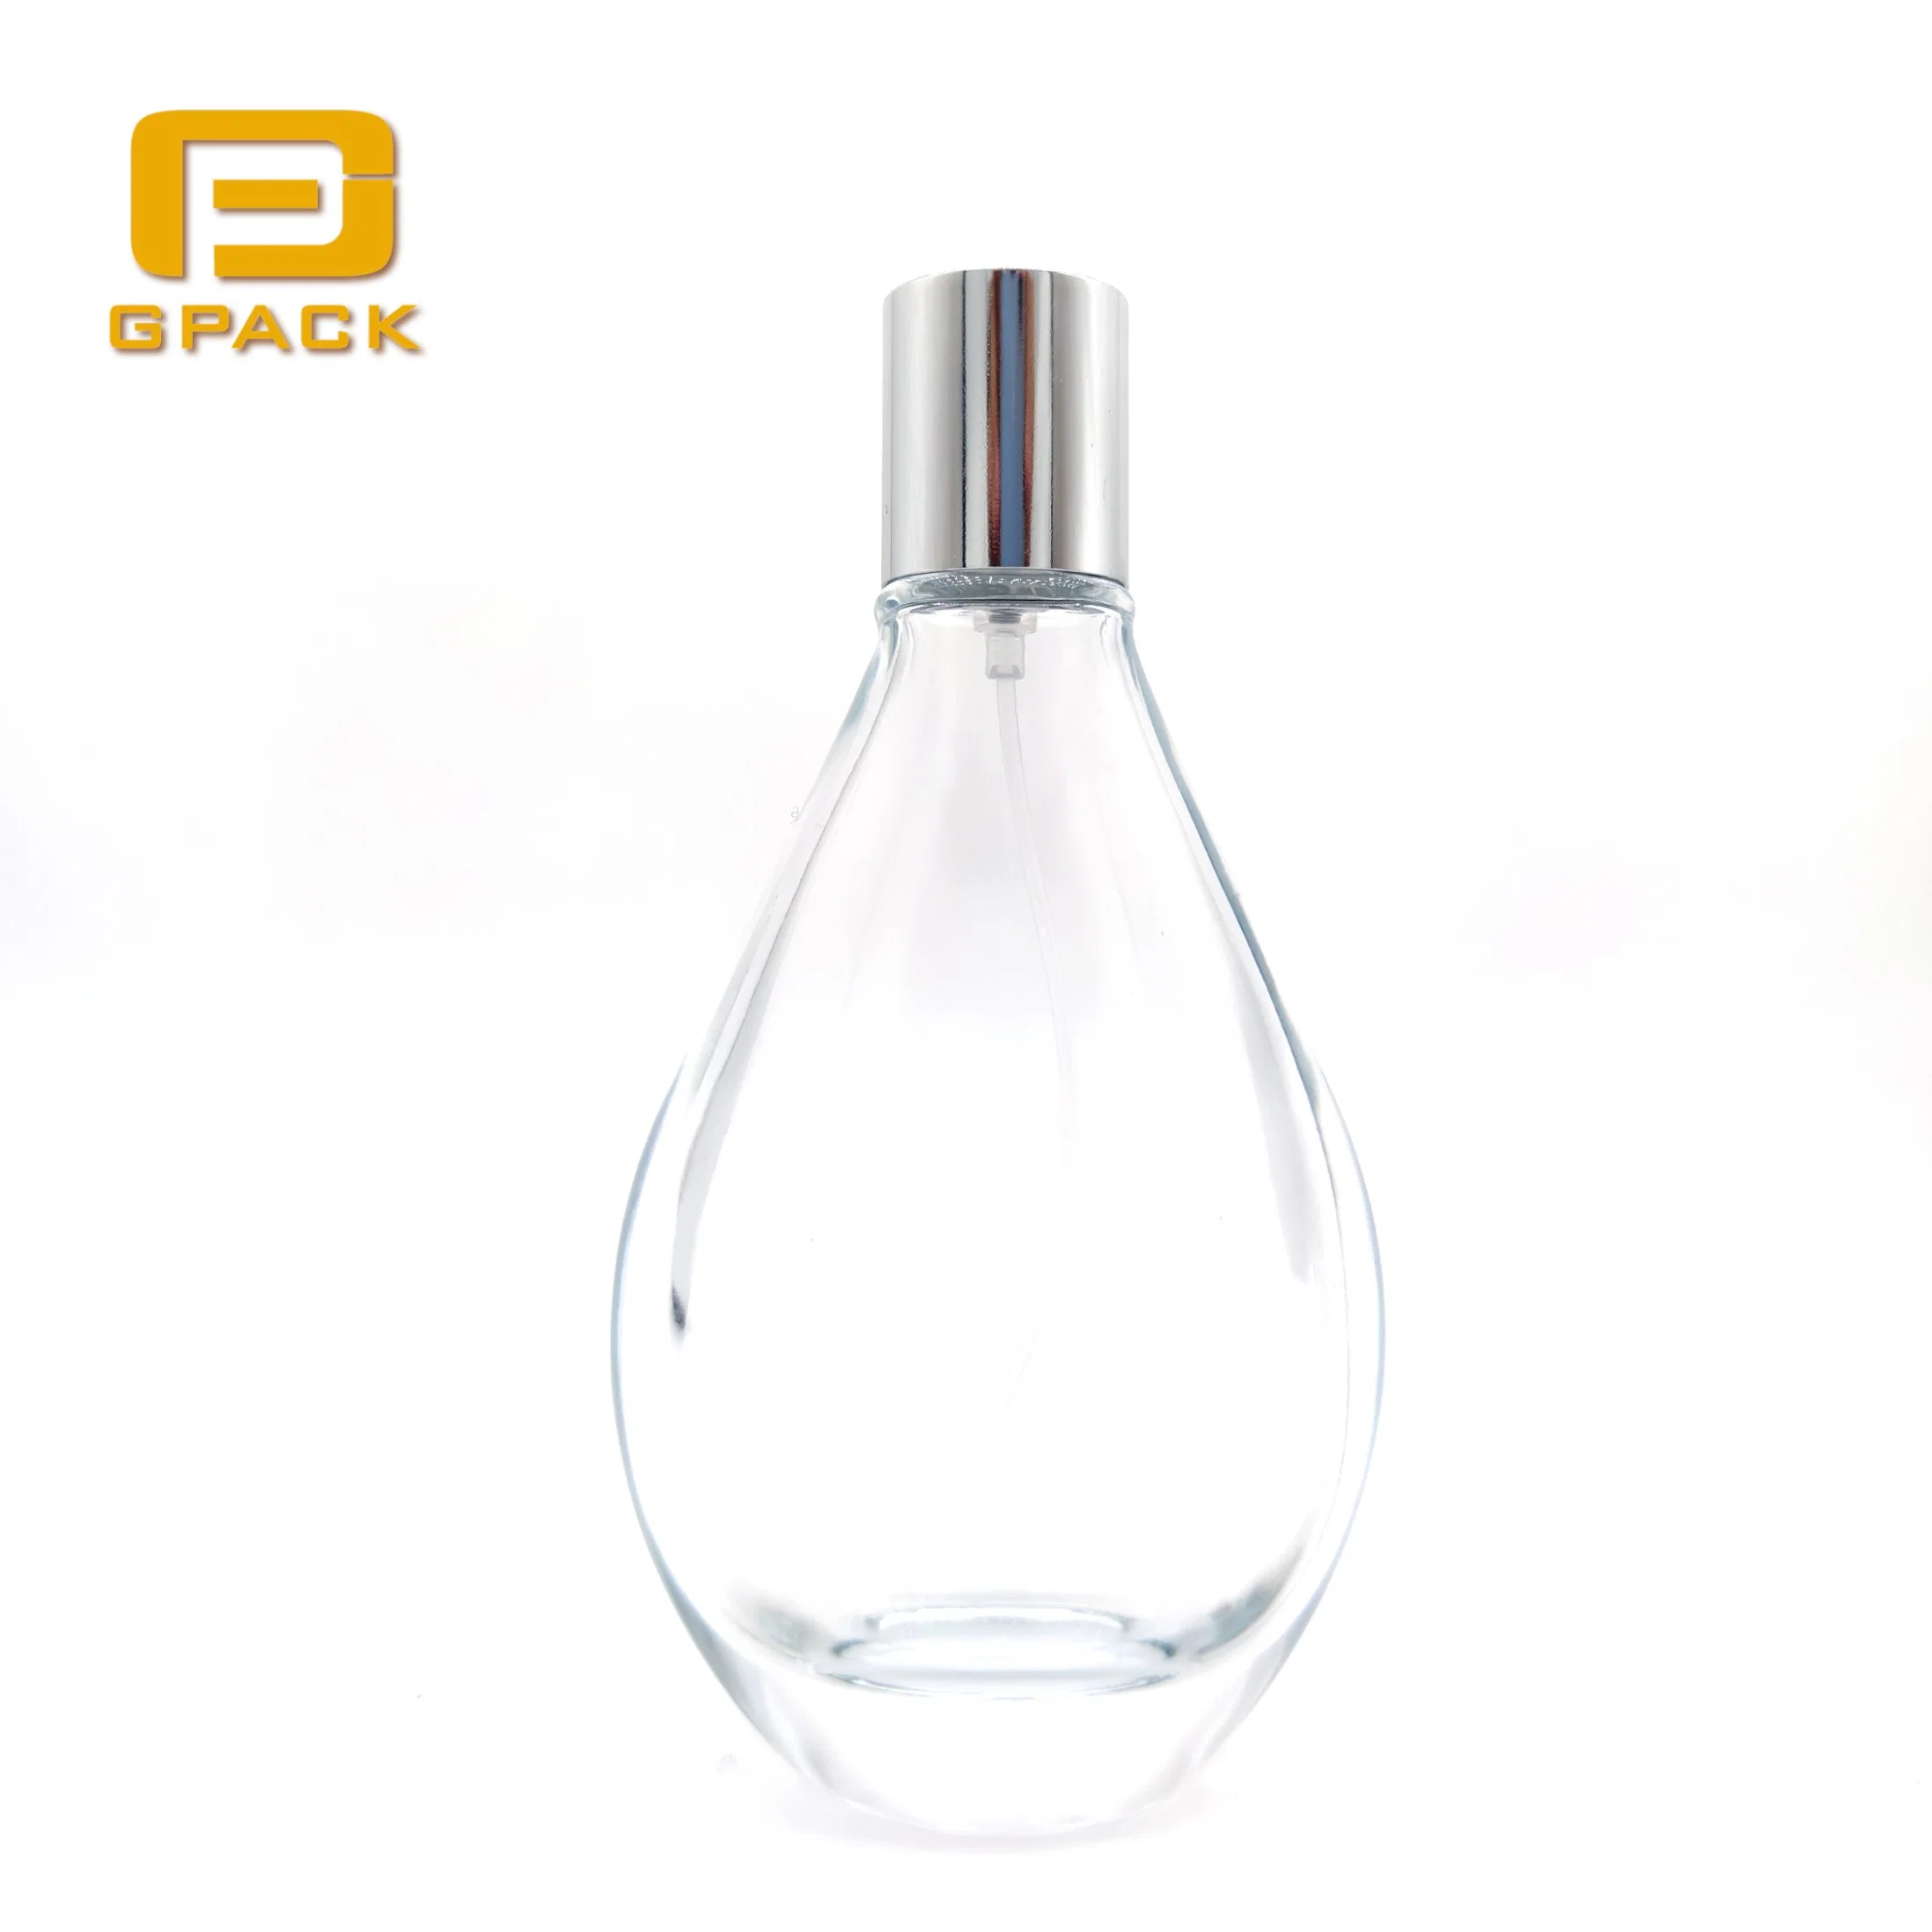 Chinese Factory Beautiful Glass Spray Bottles Egyptian Fragrance Bottle Personalised Flower Sprayer Pump Atomizer Mist Cosmetic Perfume Bottle Packaging